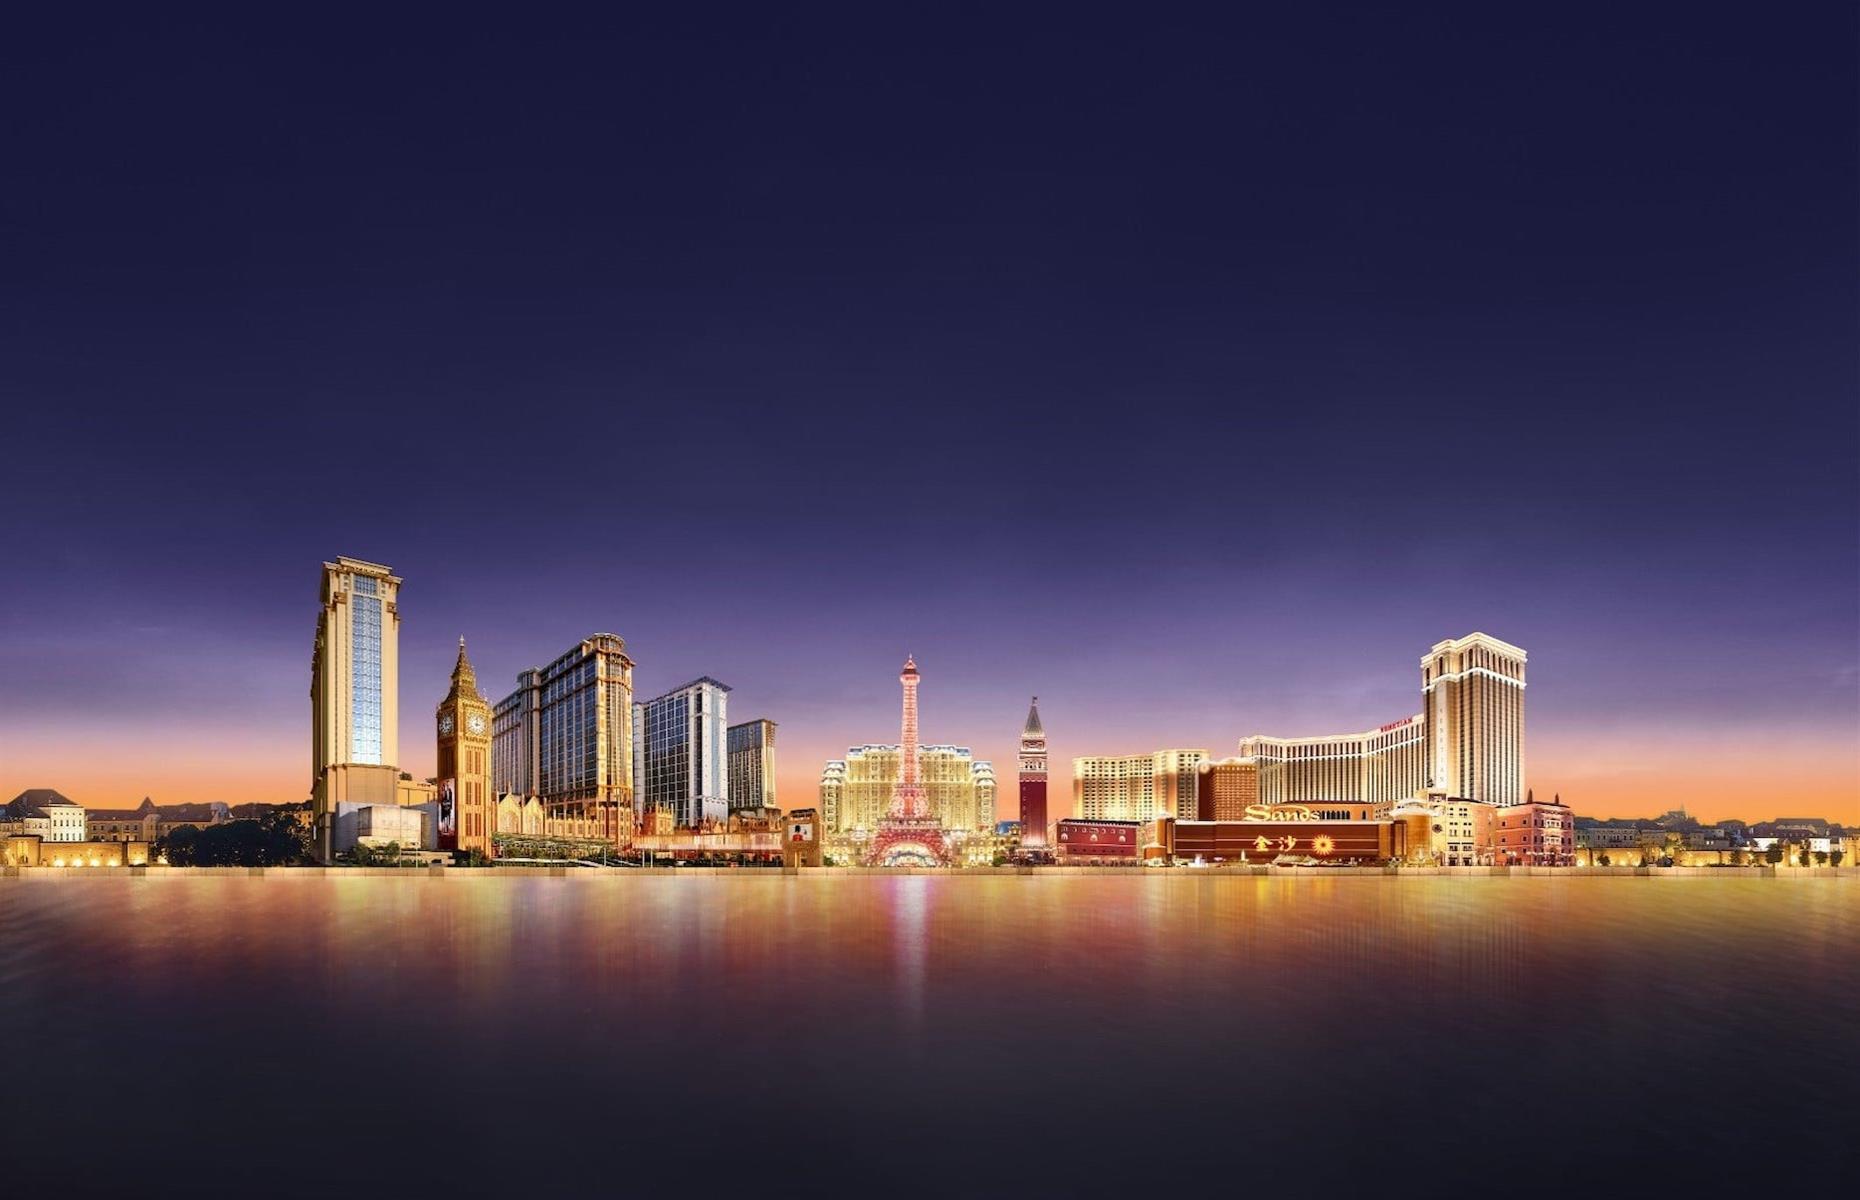 <p>When it comes to extravagance and scale, Macao’s hotels give Las Vegas a run for its money. None are more humongous than super-luxe resort The Londoner. Described as a “bold British-themed reimagining” of what was formerly the Sands Cotai Central, it has a total of 5,564 rooms within its four hotel towers. Impressive replicas of the Houses of Parliament, Big Ben and Crystal Palace, along with 351,000 square feet (351,000sqm) of gaming space are just some of the resort's jaw-dropping features.</p>